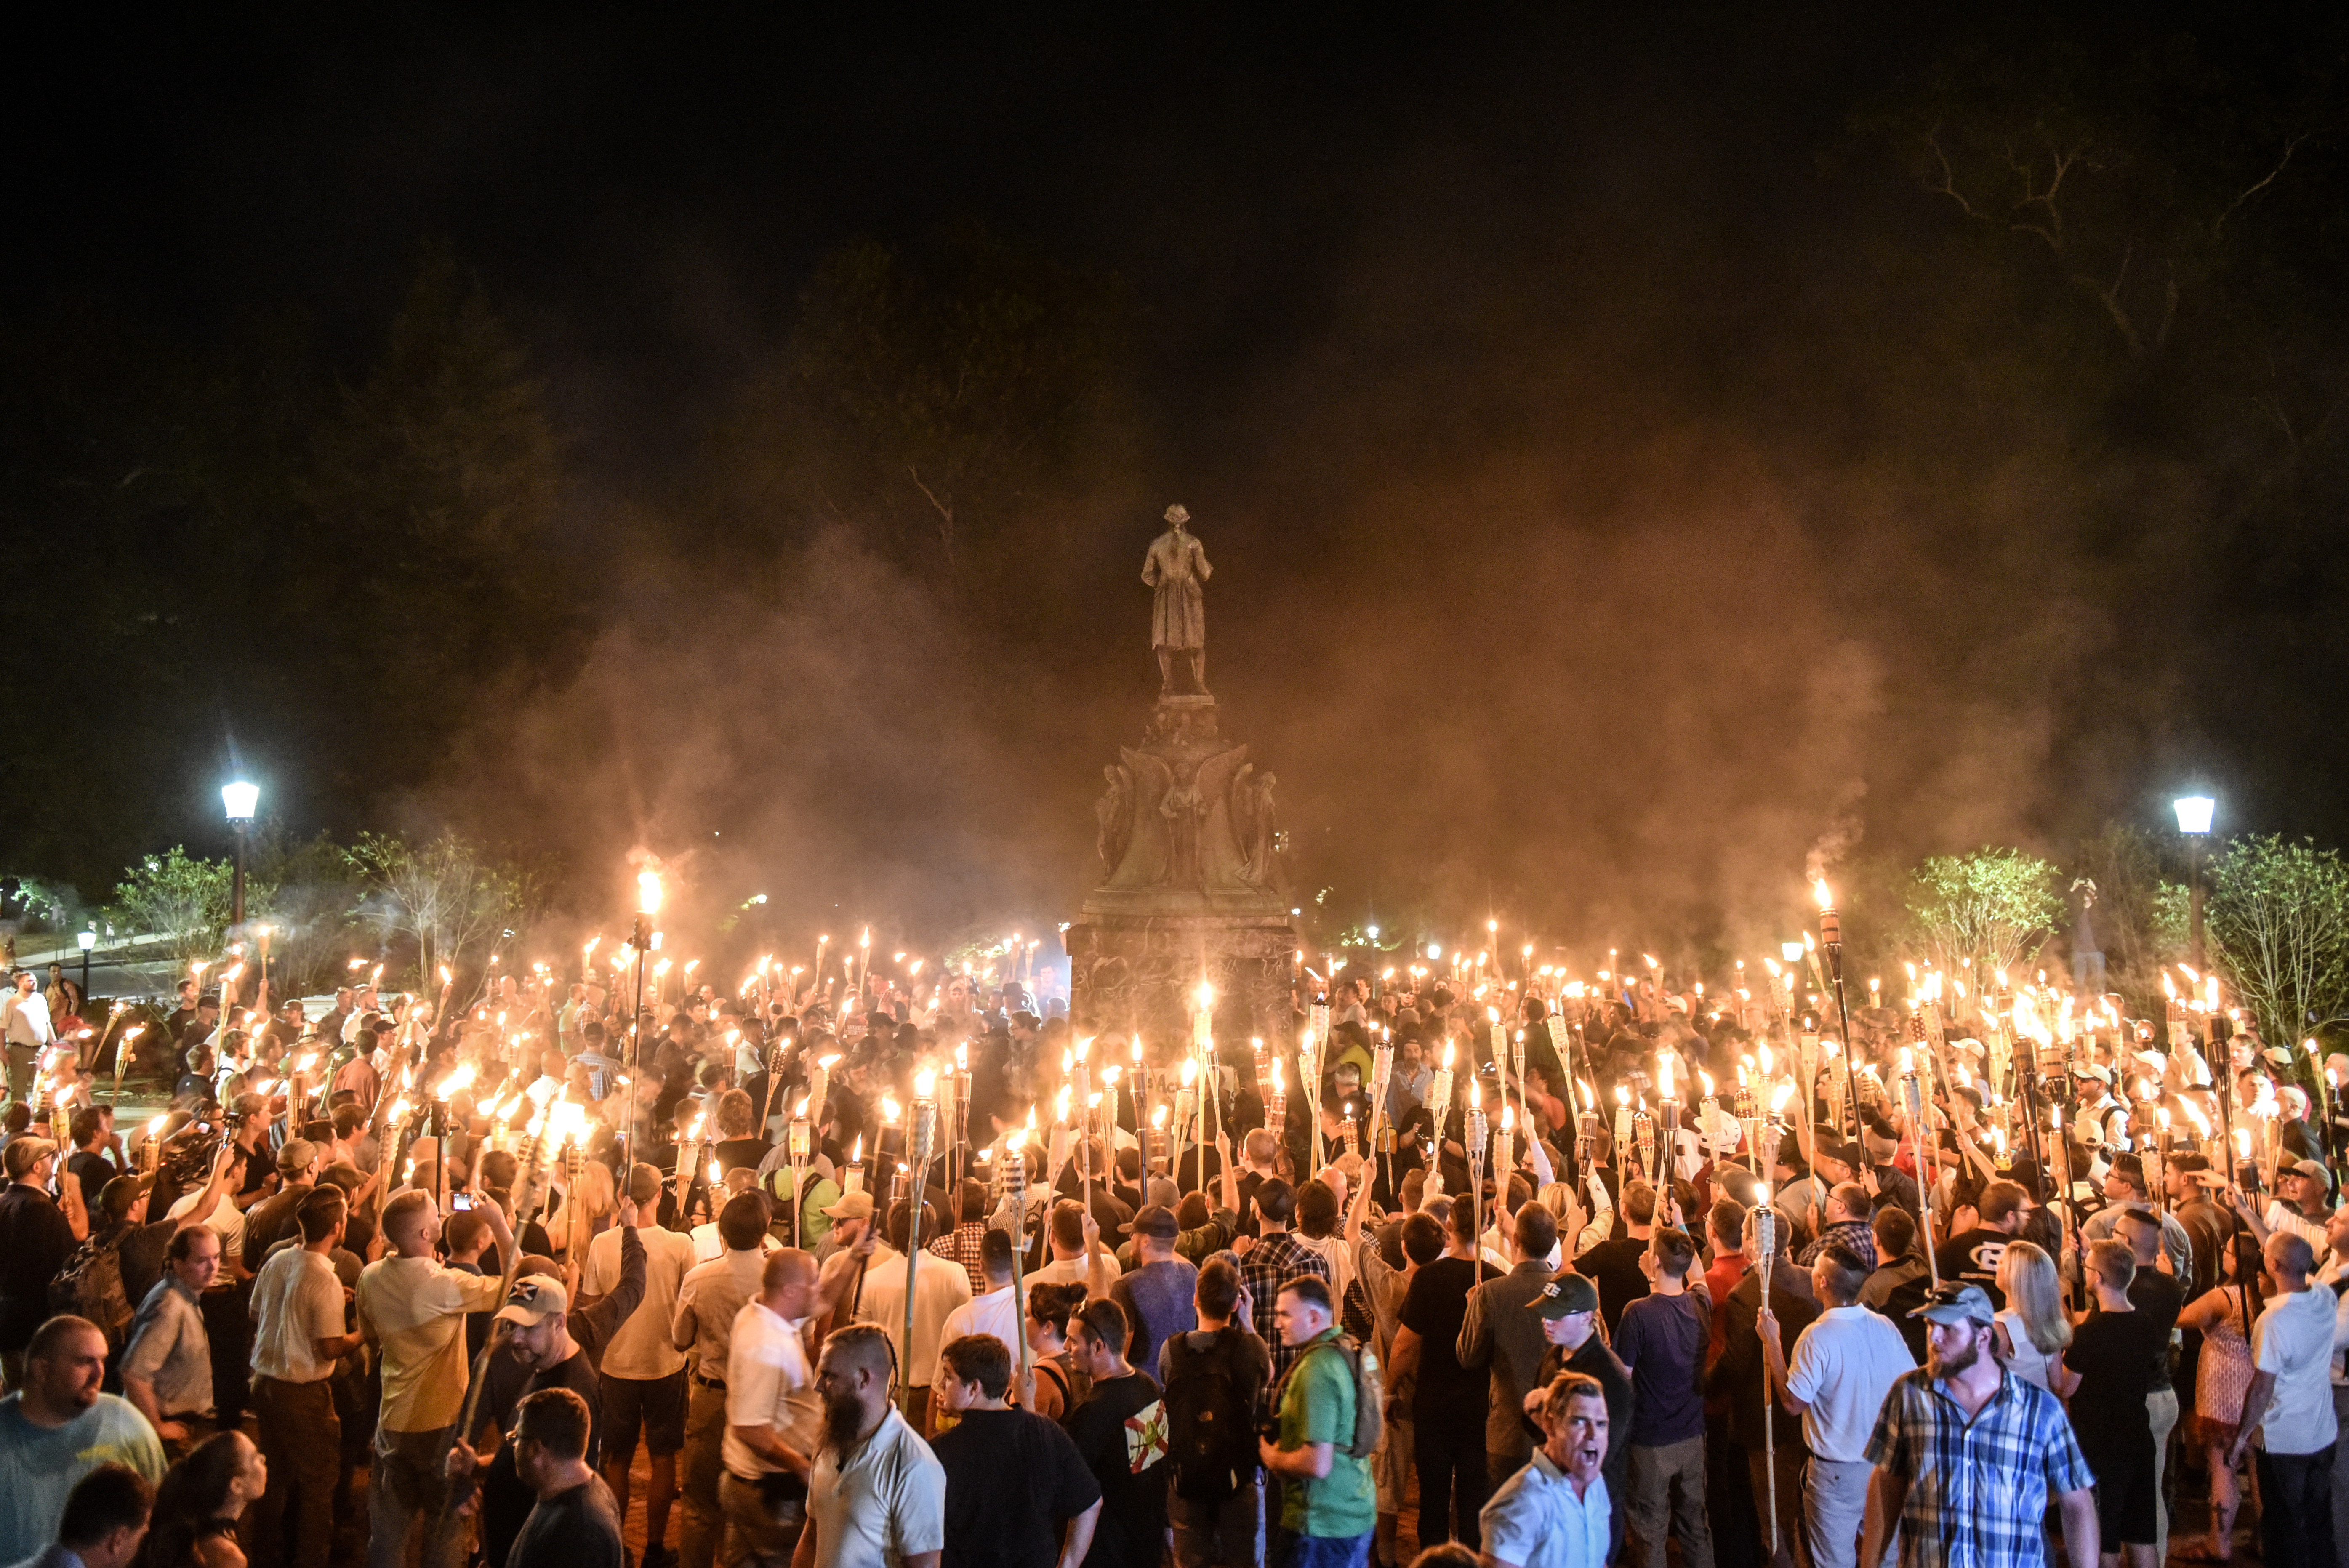 White nationalists participate in a torch-lit march on the grounds of the University of Virginia ahead of the Unite the Right Rally in Charlottesville, Virginia on August 11, 2017. REUTERS/Stephanie Keith